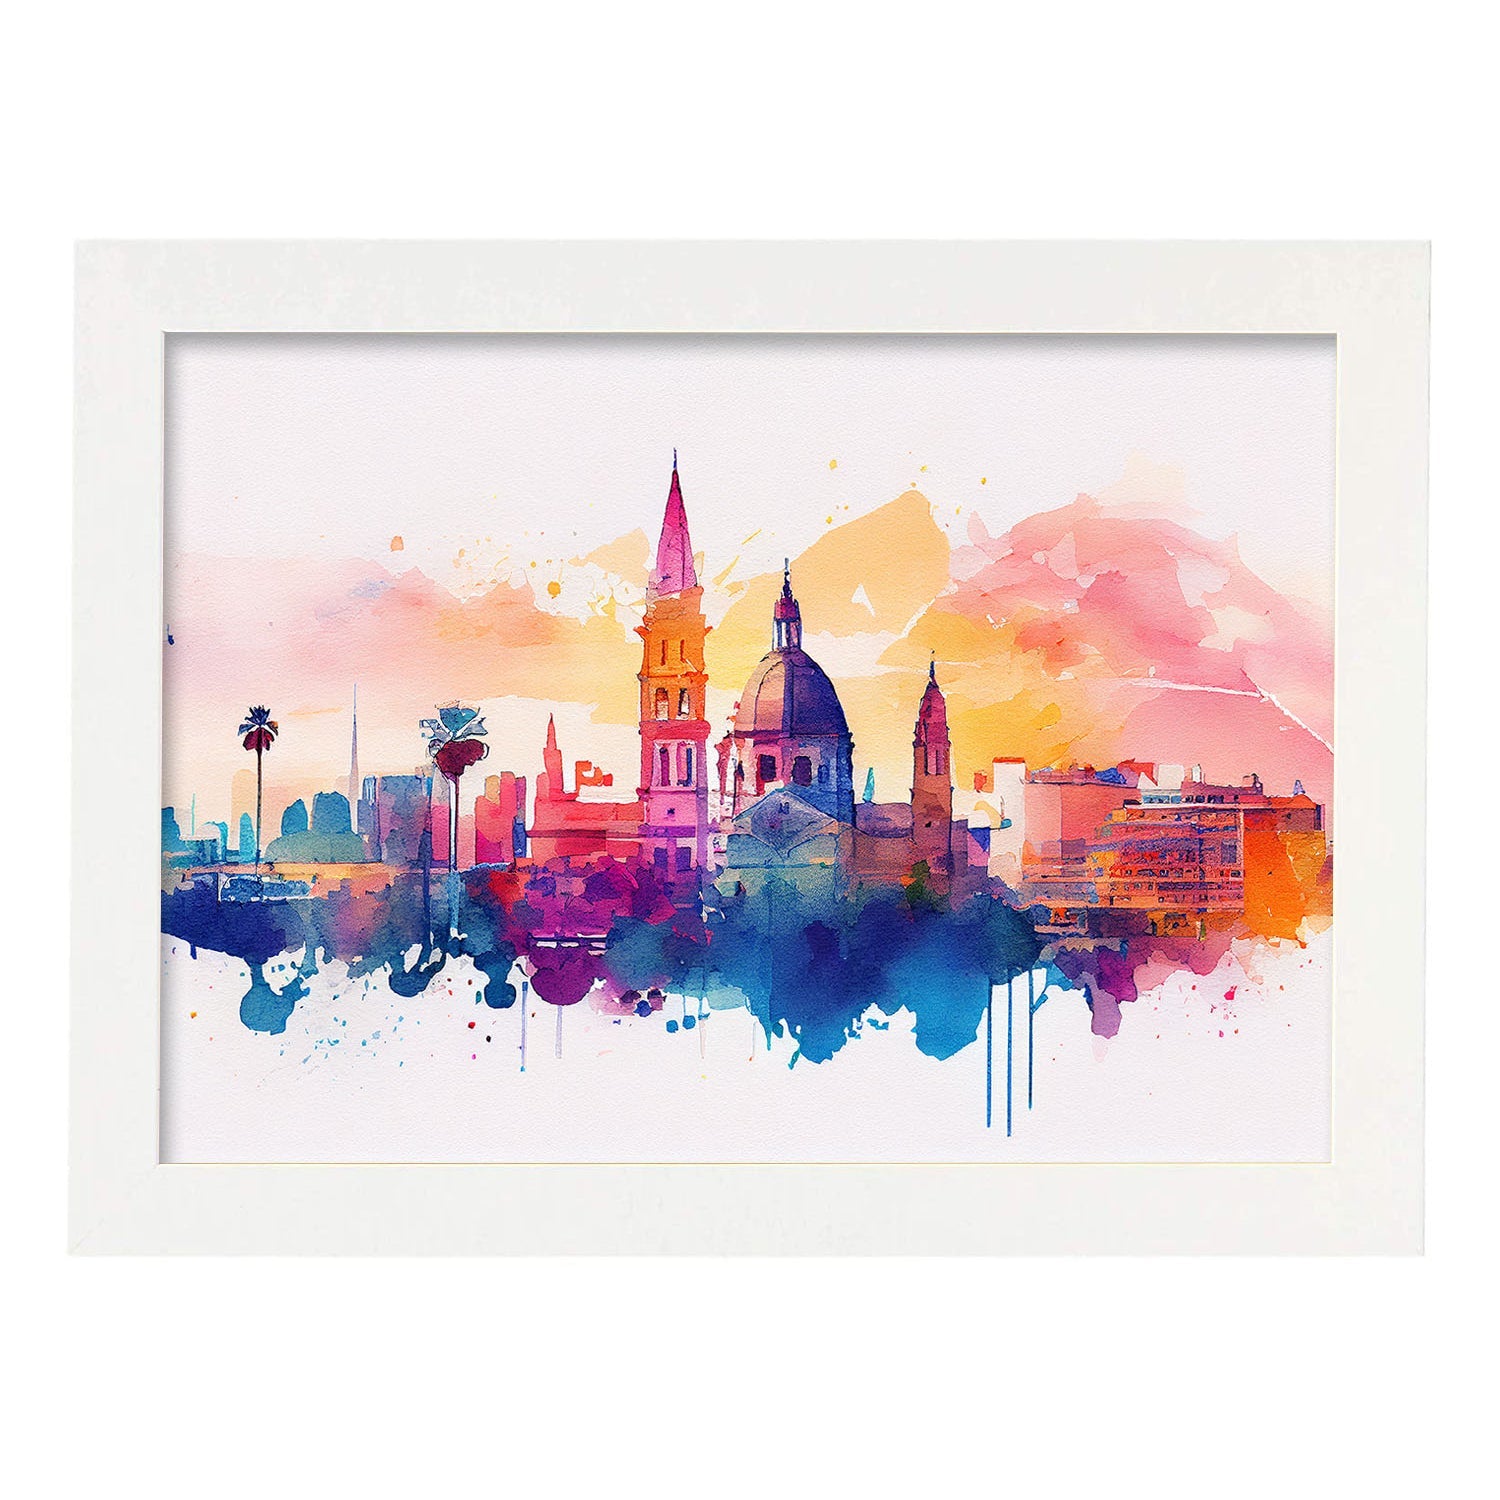 Nacnic watercolor of a skyline of the city of Valencia_1. Aesthetic Wall Art Prints for Bedroom or Living Room Design.-Artwork-Nacnic-A4-Marco Blanco-Nacnic Estudio SL